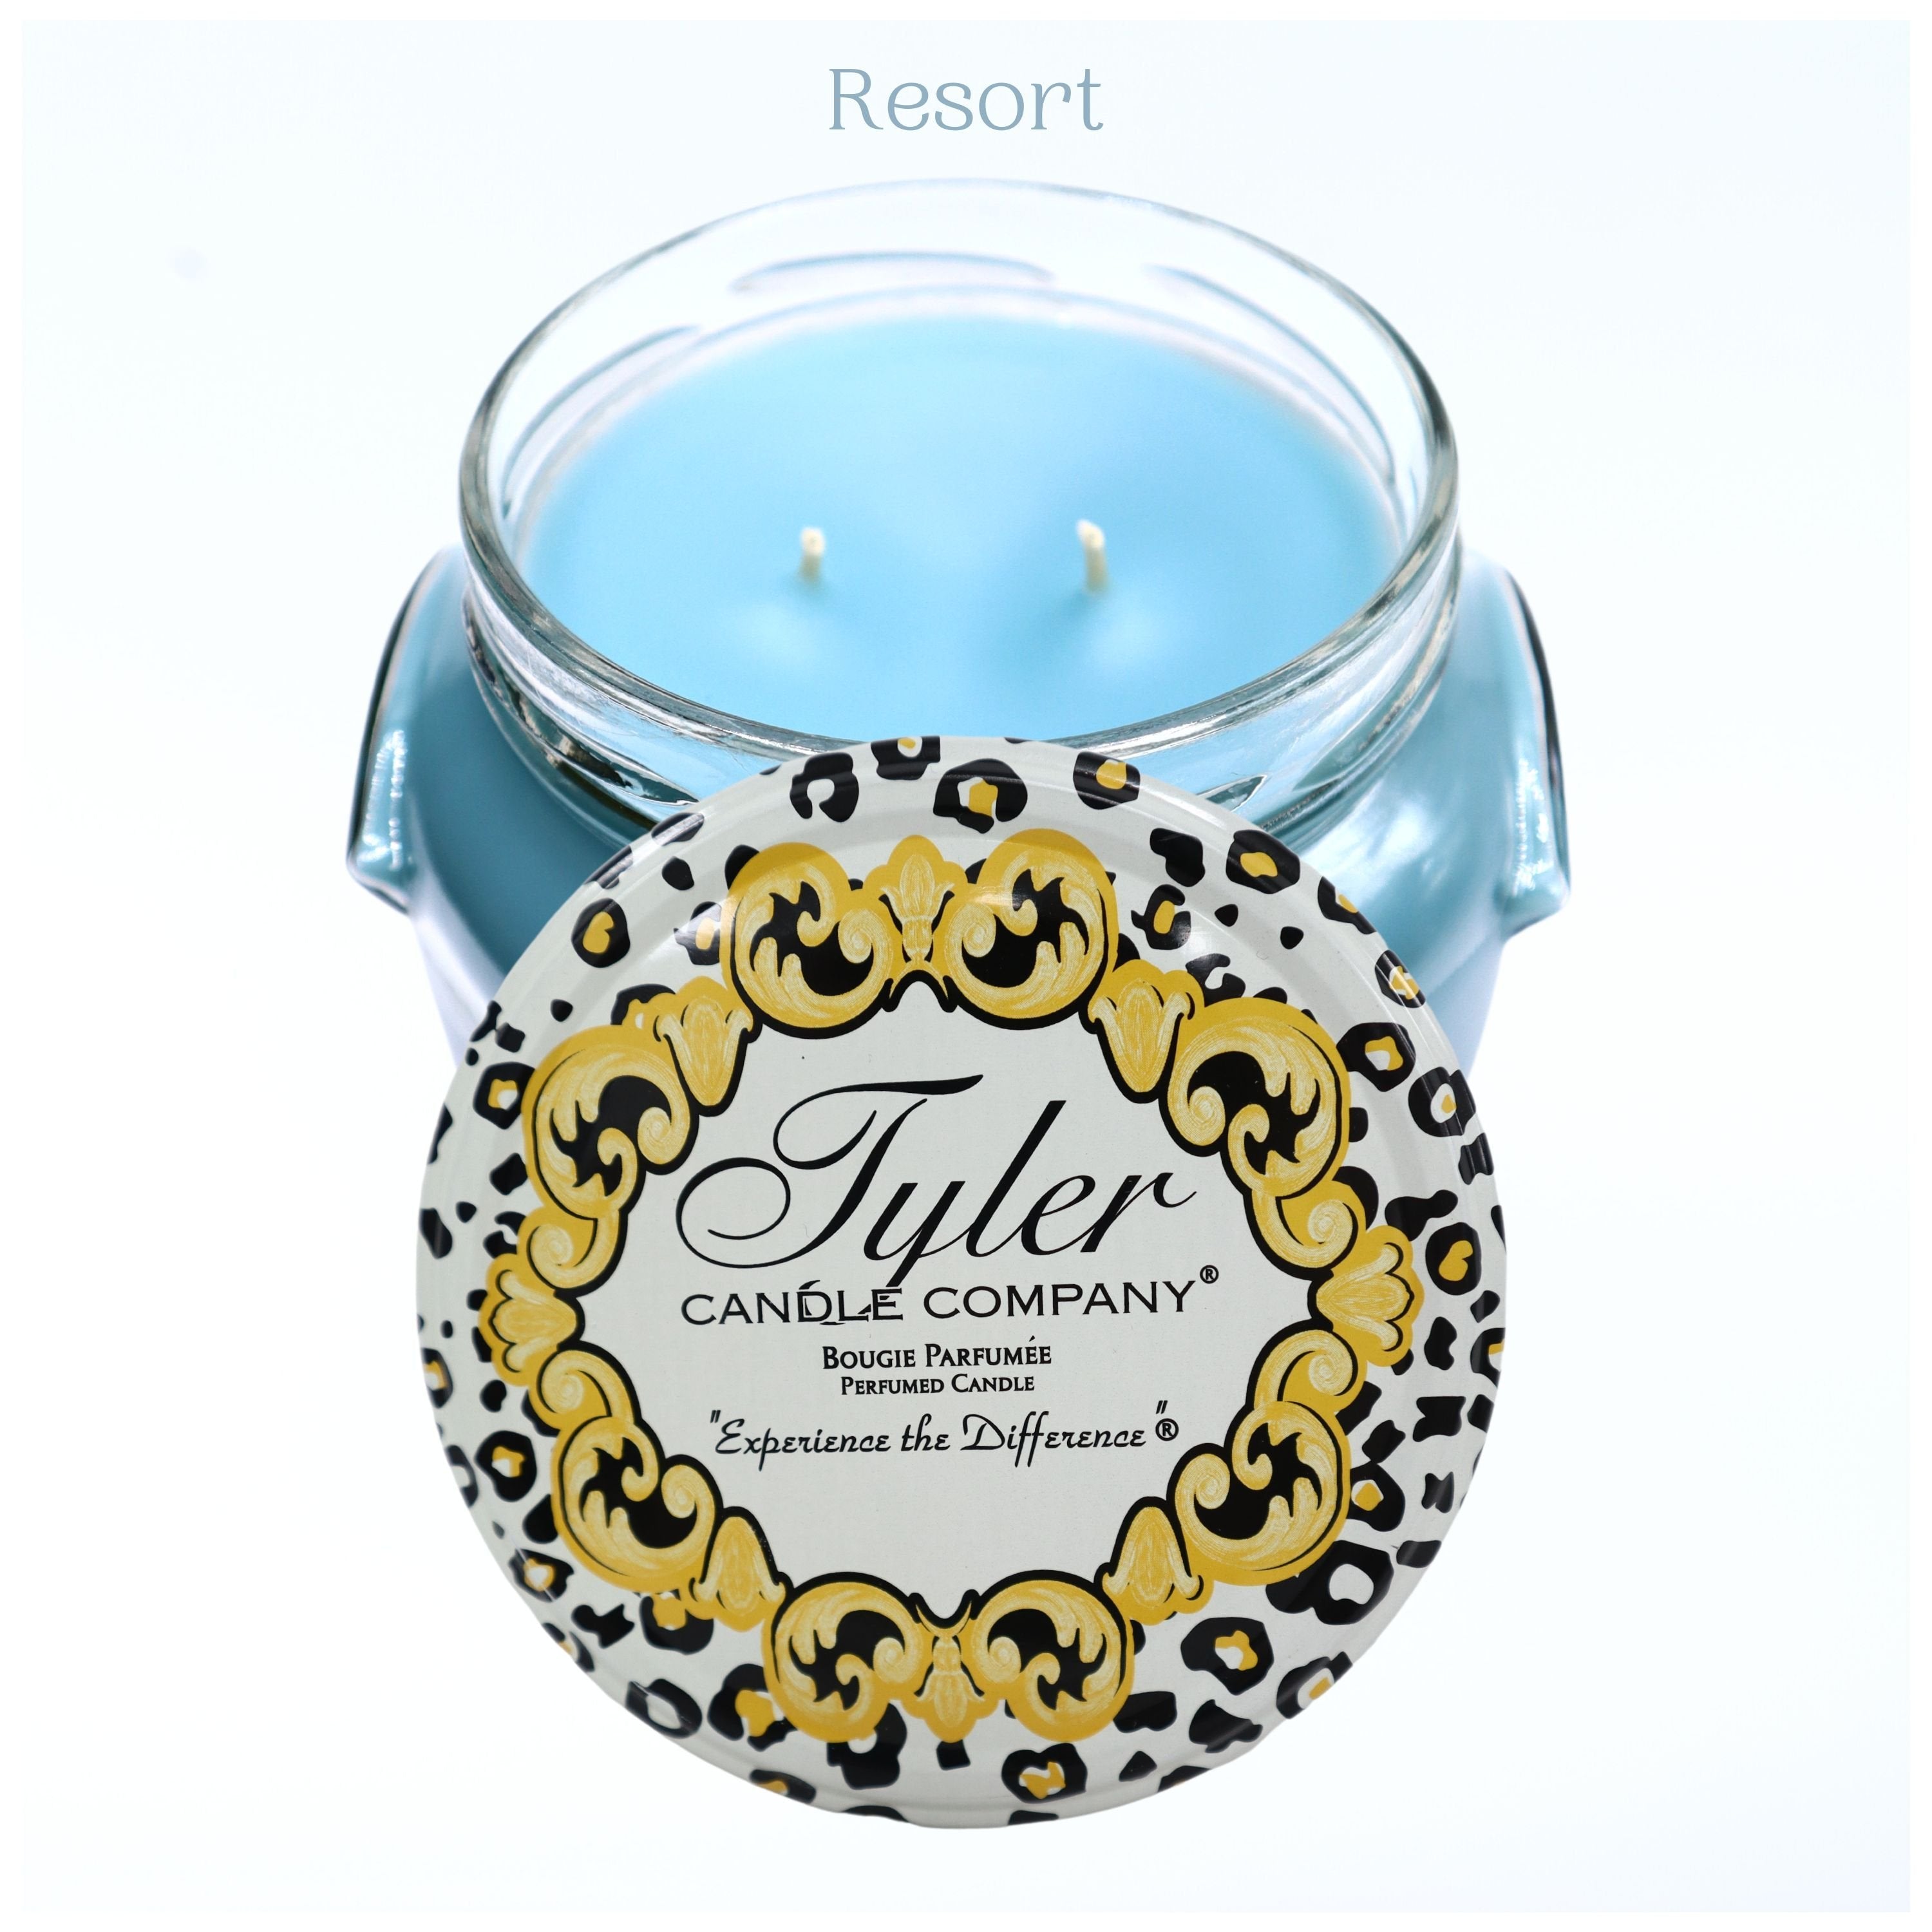 Tyler Candle Company, Resort Jar Candle, Scented Candles Gifts for Women, Ultimate Aromatherapy Experience, Luxurious Candles with Essential Oils, Long-Lasting Burn, Large Candle 22oz